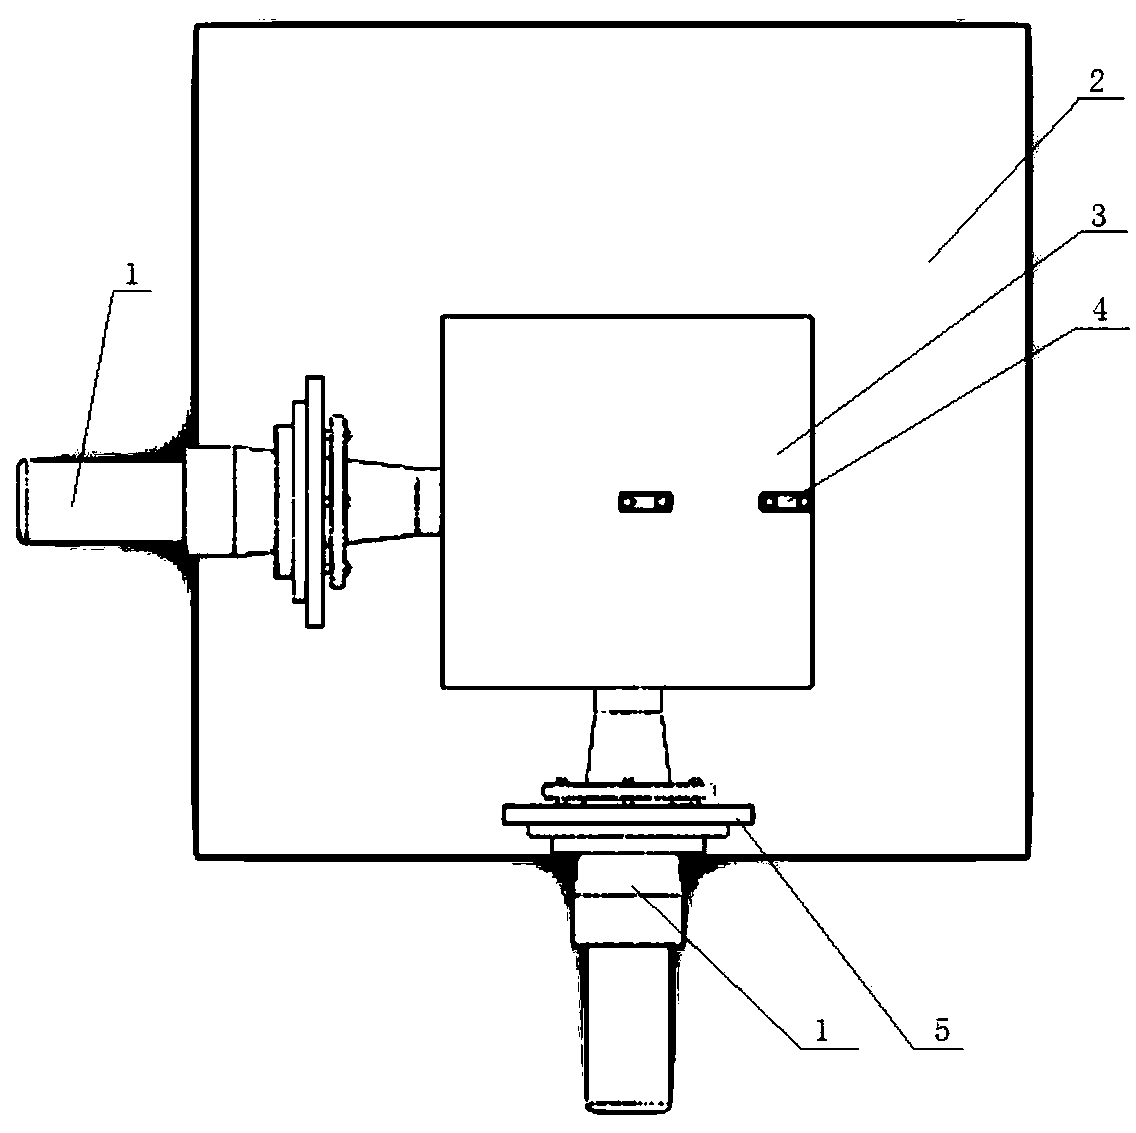 Two-dimensional vibrating table for precision ultrasonic machining